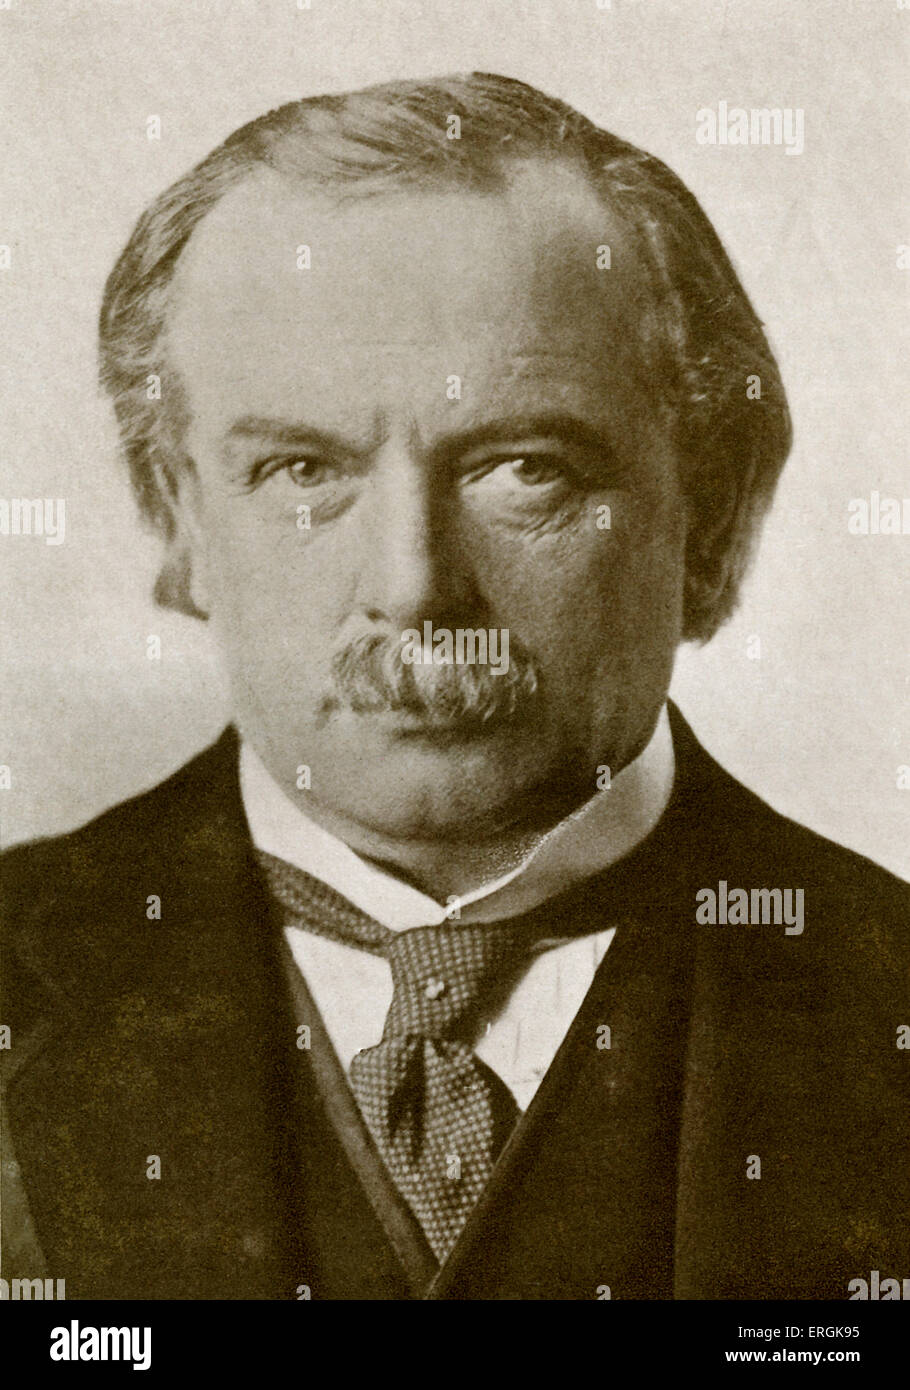 Prime Minister David Lloyd George (1863 - 1945), during WW1. Lloyd George lead a war-time coalition government from 1916-22. Stock Photo